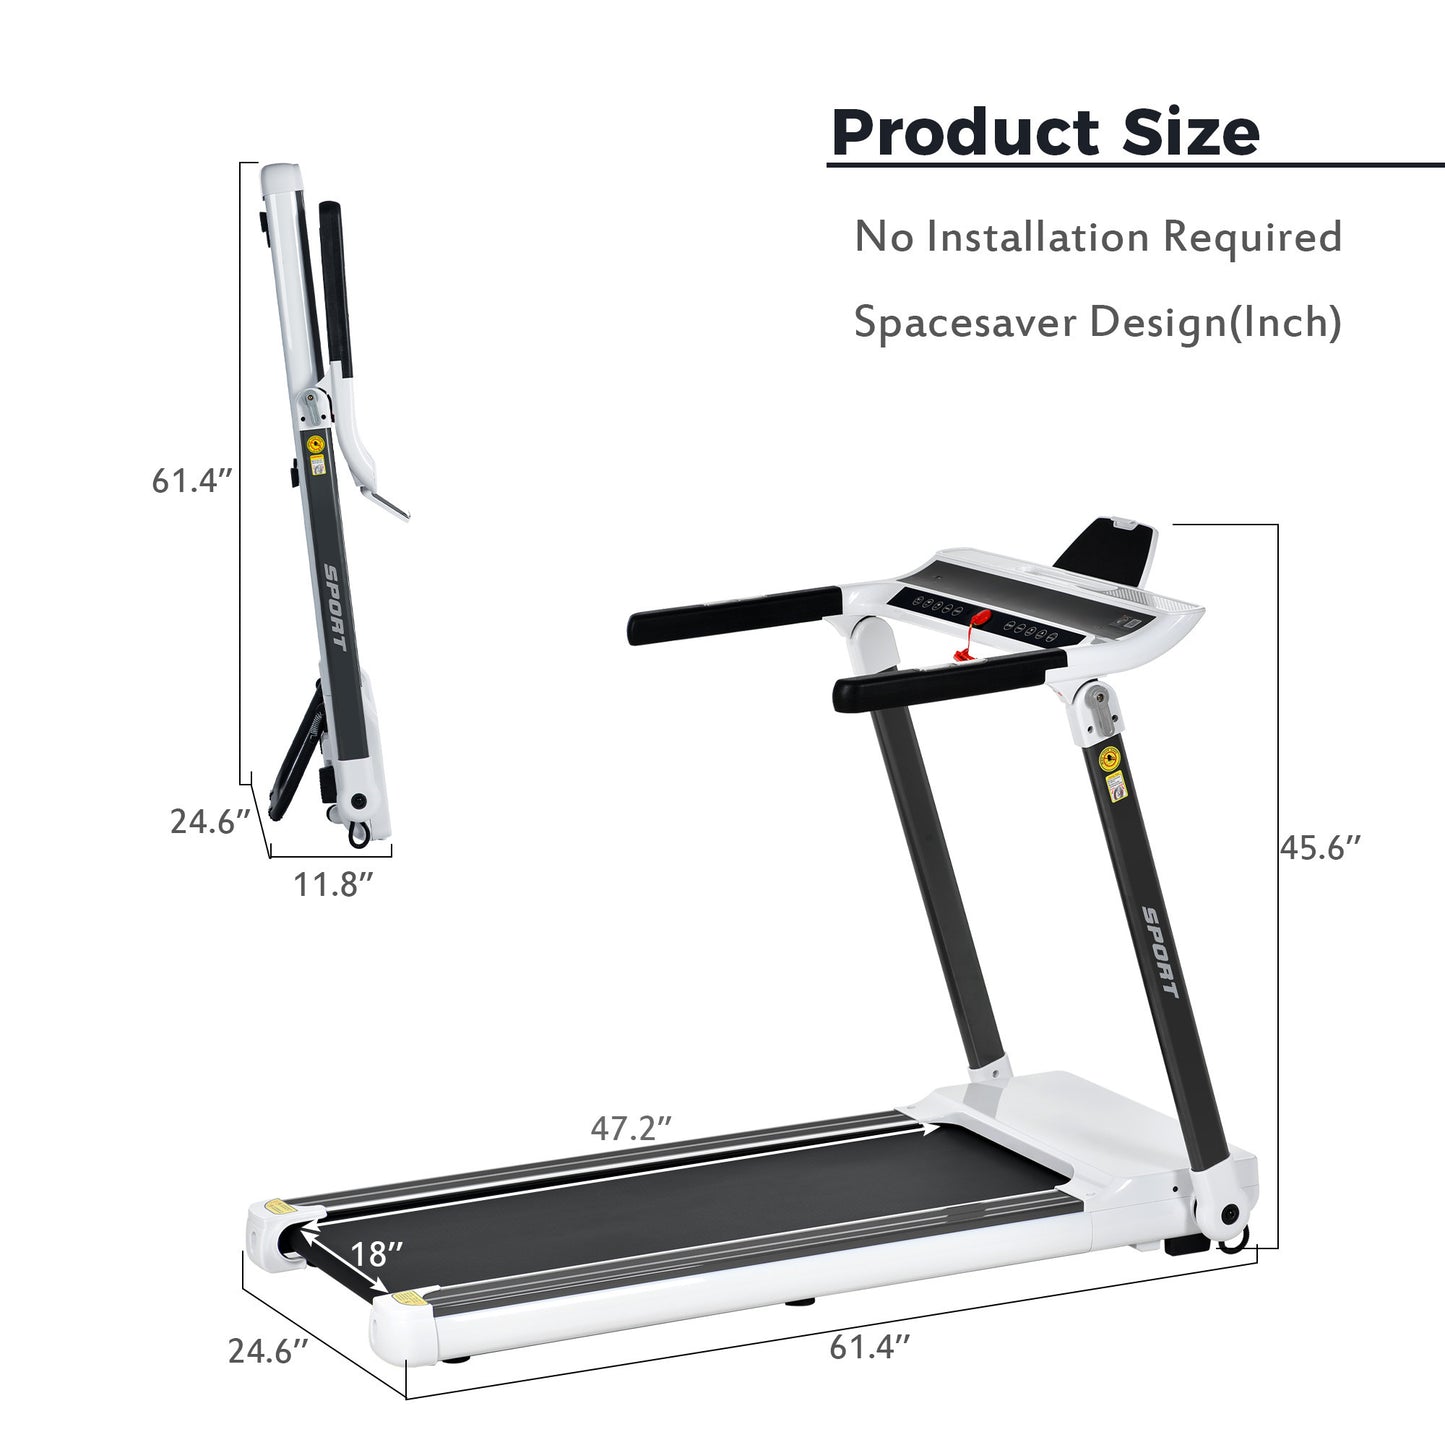 Portable Compact Treadmill;Electric Motorized 3.5HP;14KM/H;Medium Running Machine Motorised Gym 330lbs;Foldable for Home Gym Fitness